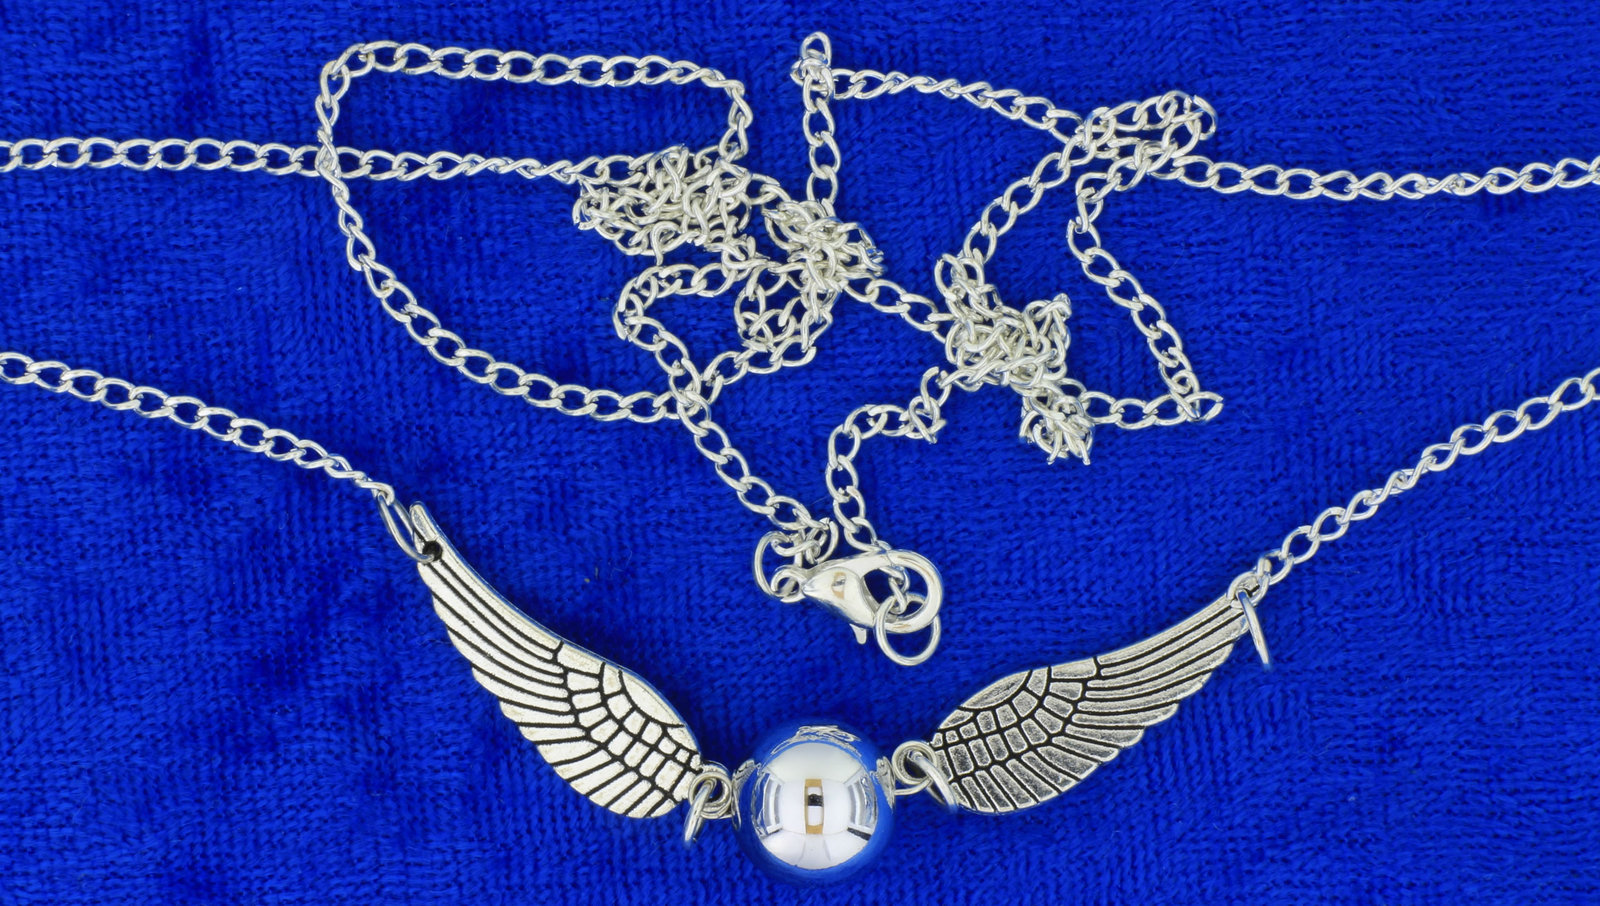 Golden Snitch Necklace Silver Color Chain Length Choice - $4.49 - $5.99